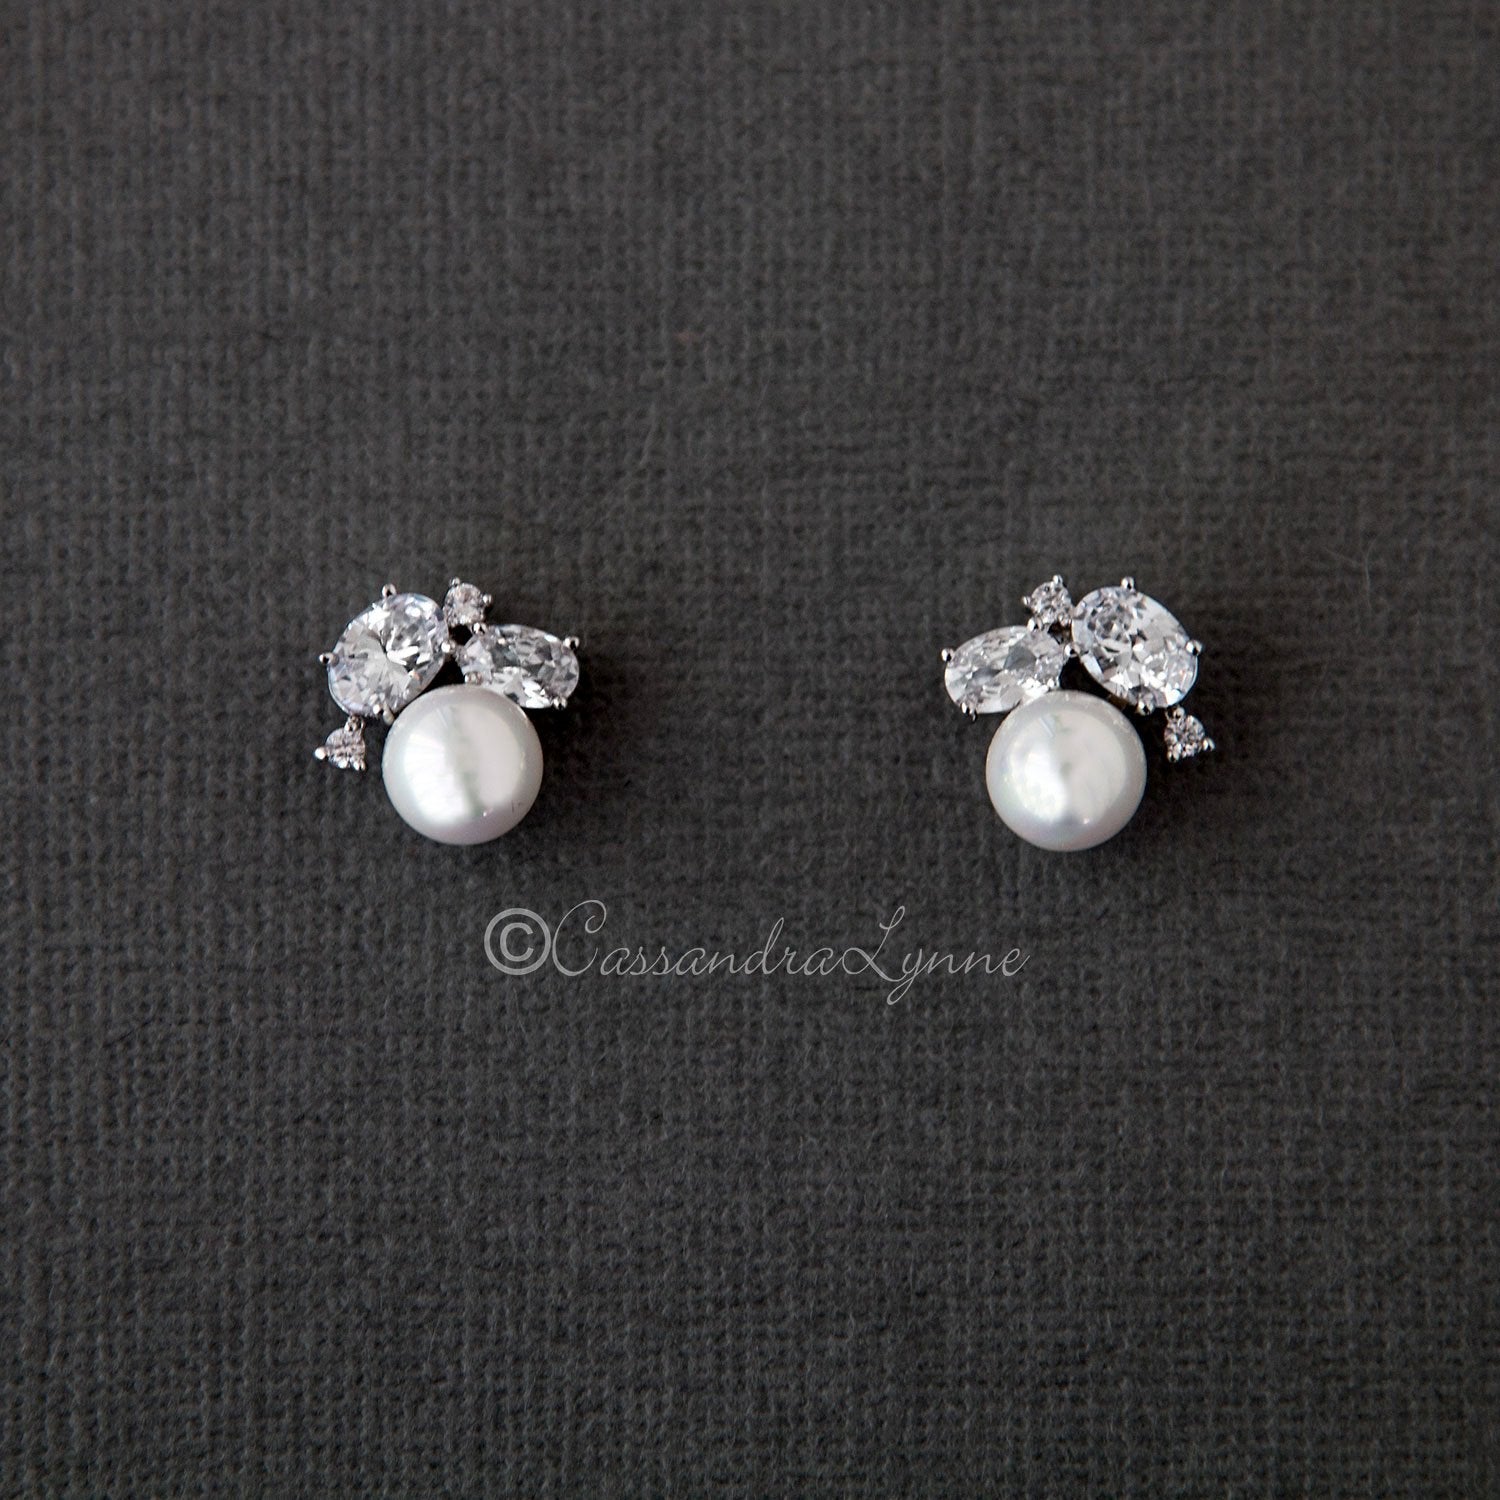 Wedding Day Bridal Earrings Cubic Zirconia and Pearl - Cassandra Lynne